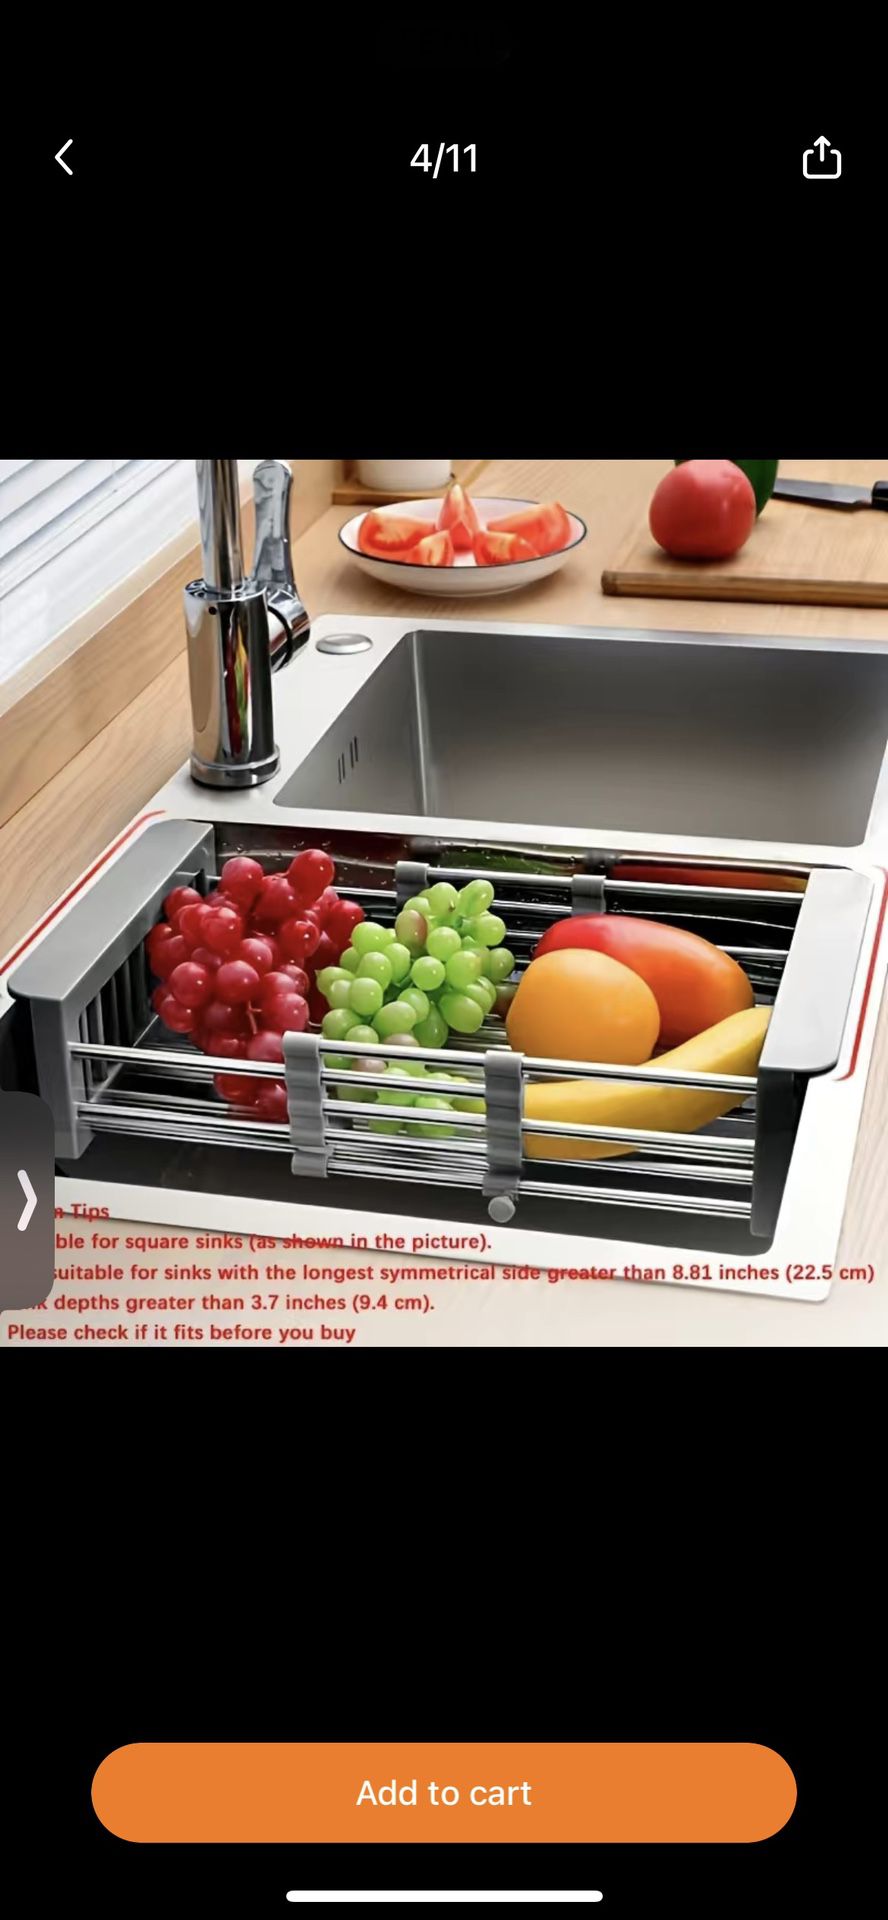 Stainless Steel Kitchen Basket, Home Dish Rack, Retractable Sink Shelf, 8.81*(11.22-18.5)*3.7in, Suitable For Rectangular Sink